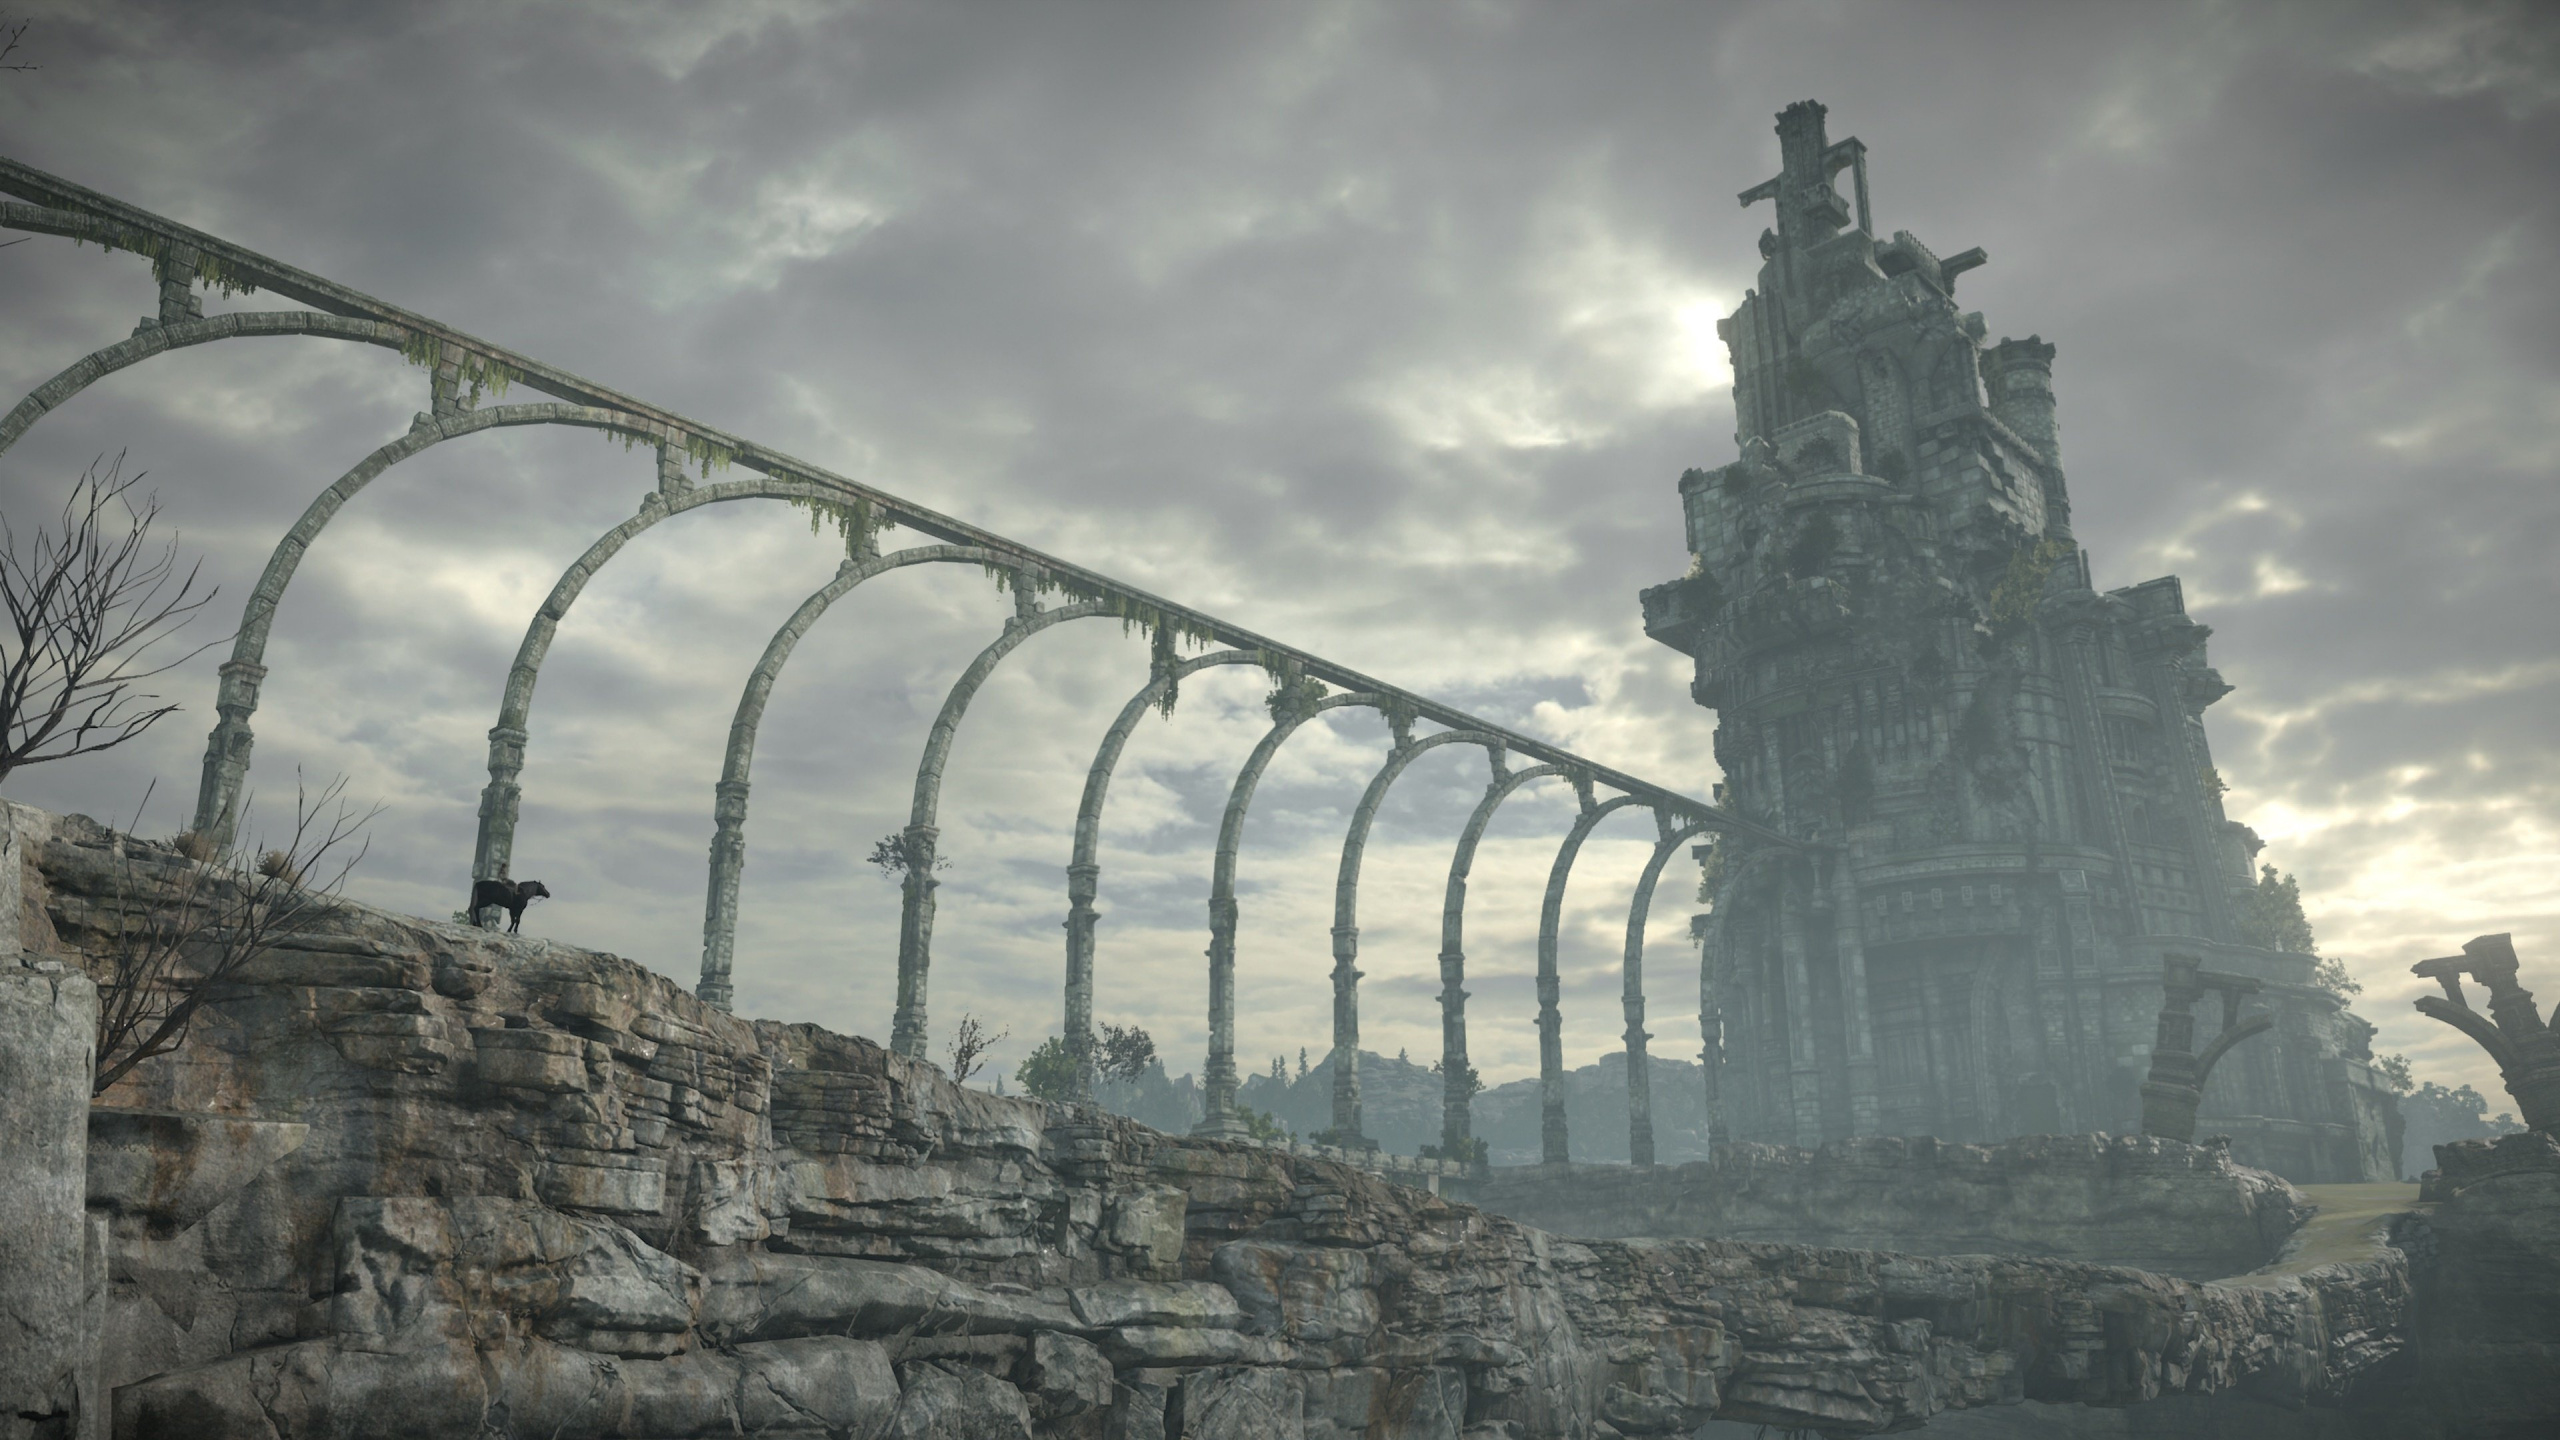 Shadow of The Colossus, Playstation 4, Remake, Bridge, Architecture. Wallpaper in 2560x1440 Resolution